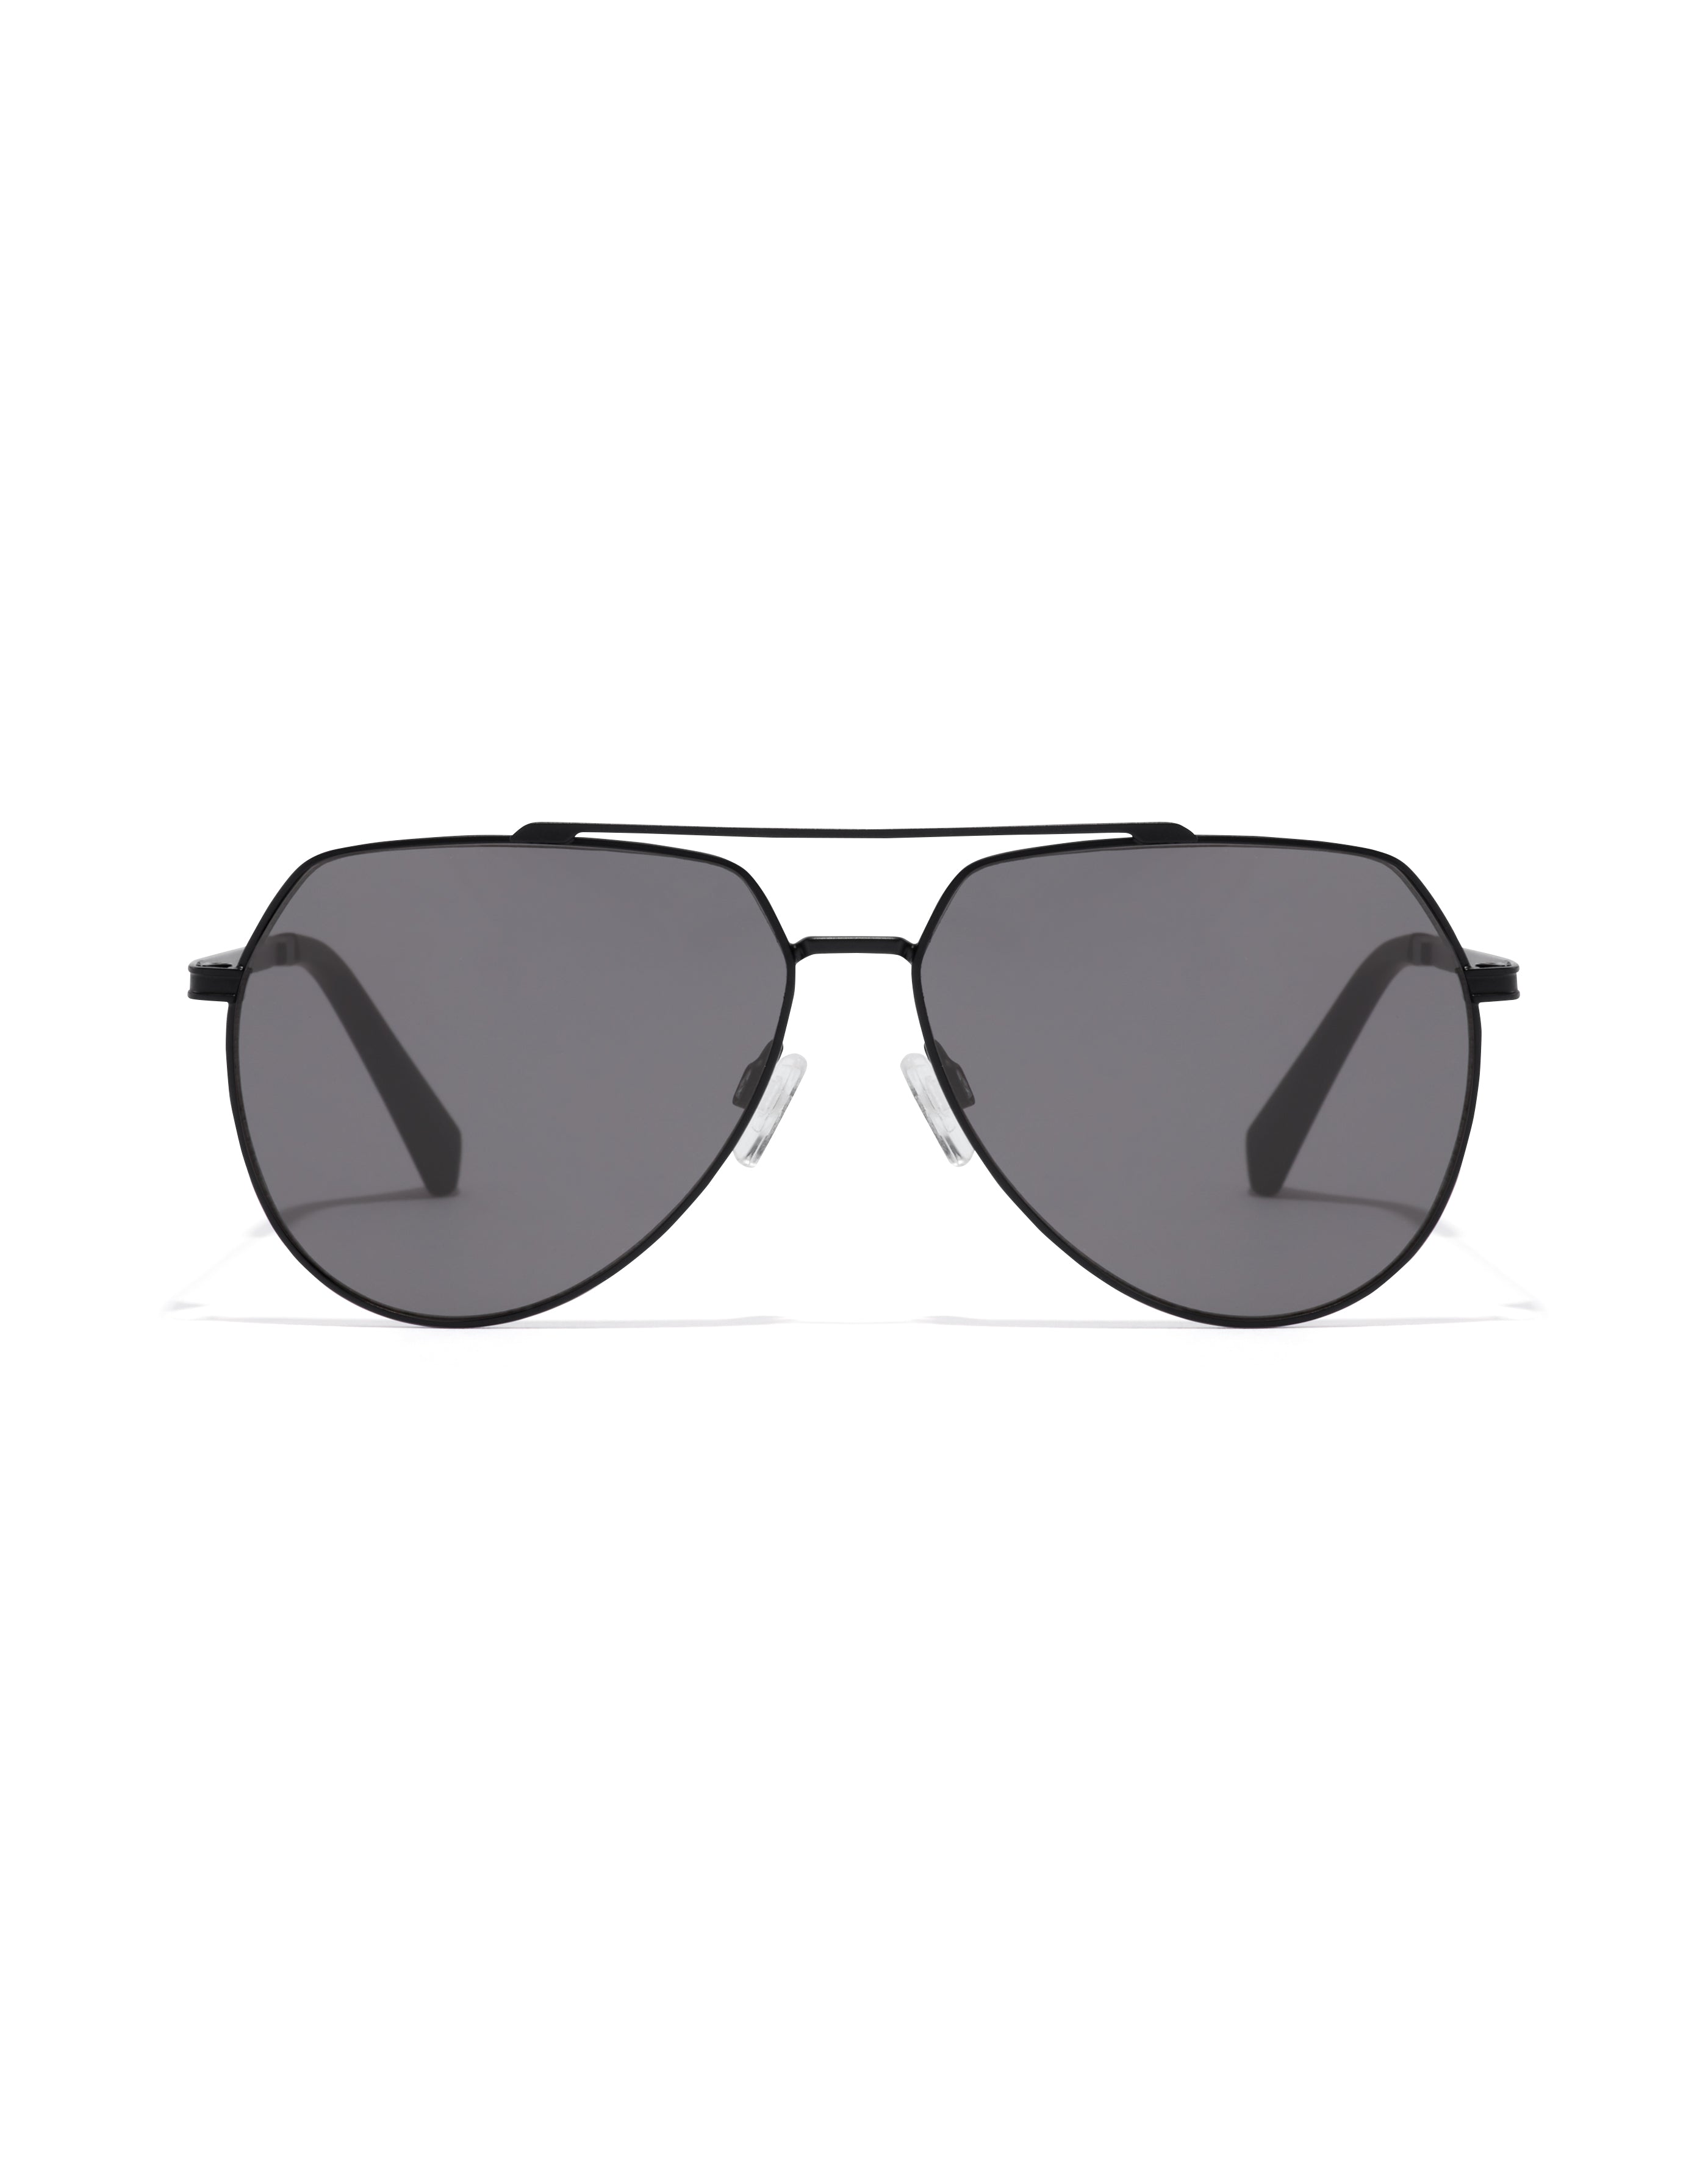 HAWKERS - SHADOW POLARIZED Black For Men and Women UV400